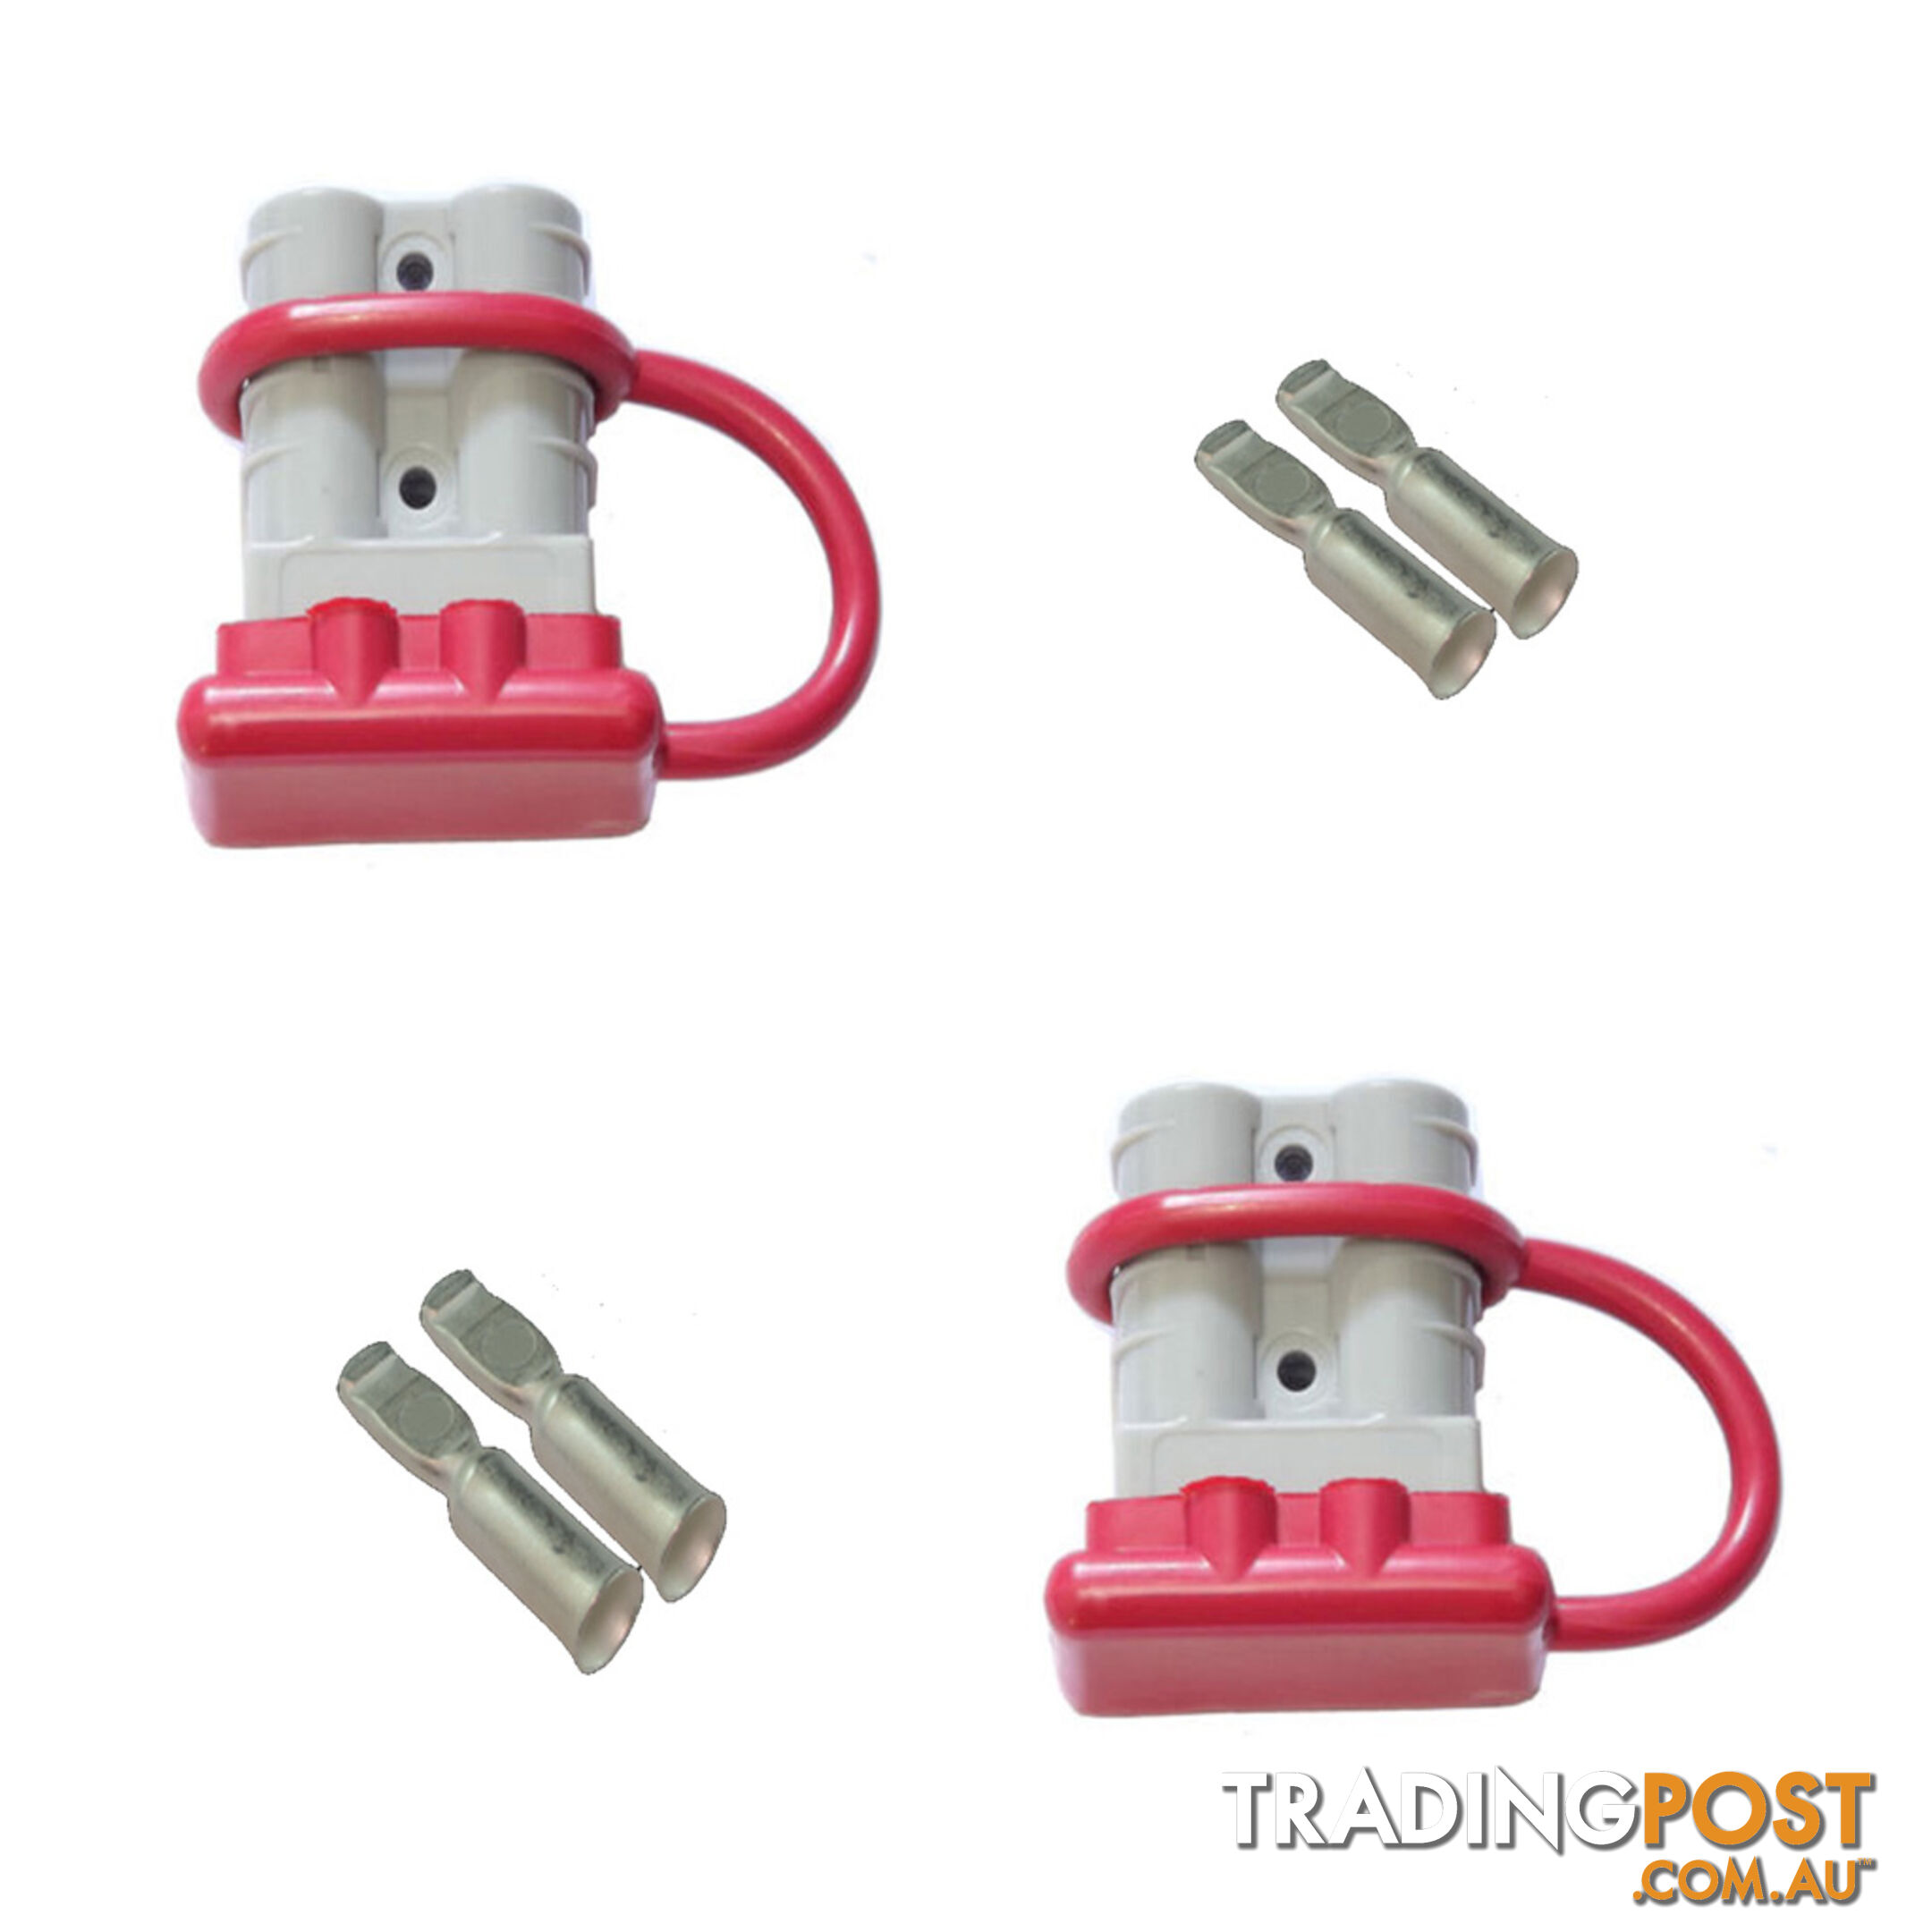 2 x 50 amp Anderson Plugs and Red Dust Covers SKU - BB-50ampAndRedCapx2